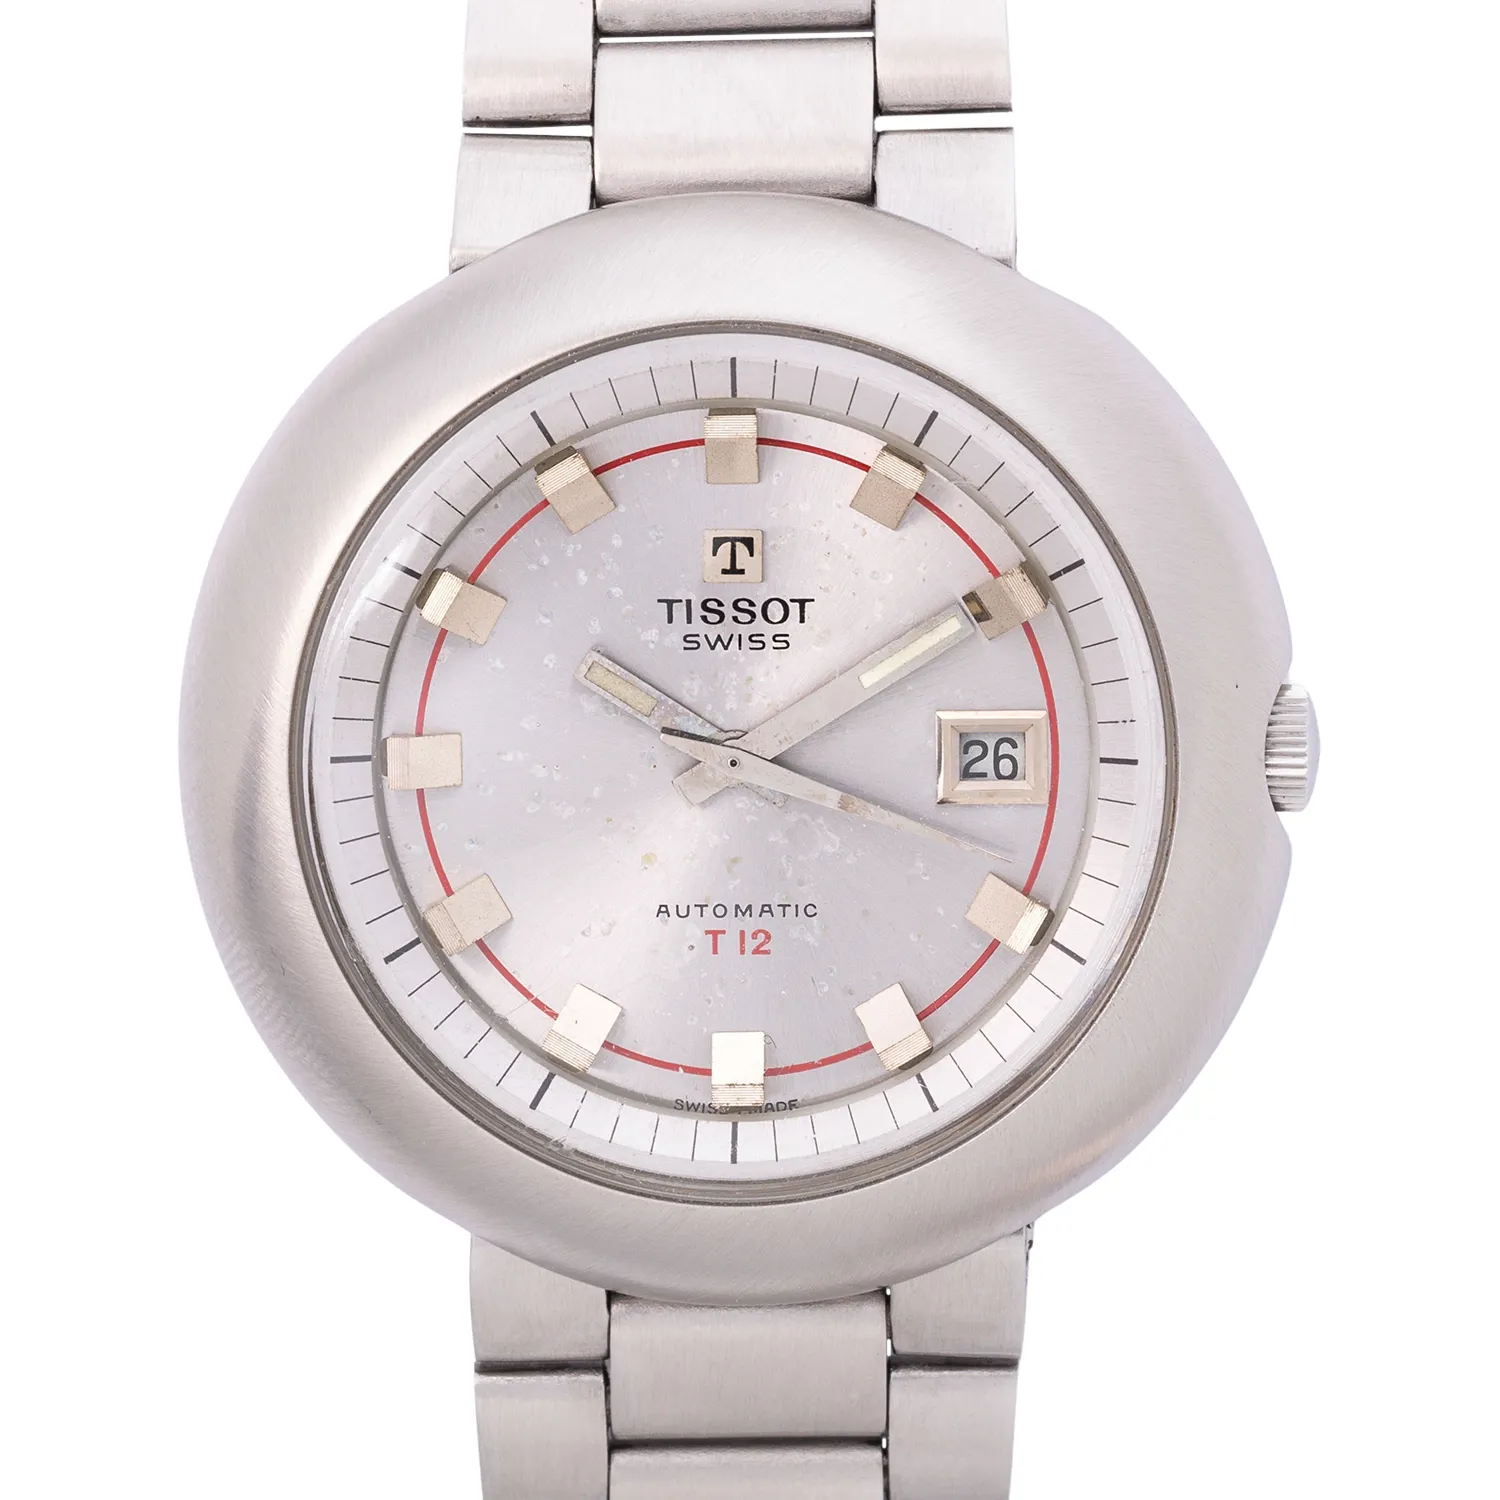 Tissot T12 44mm Stainless steel Silver